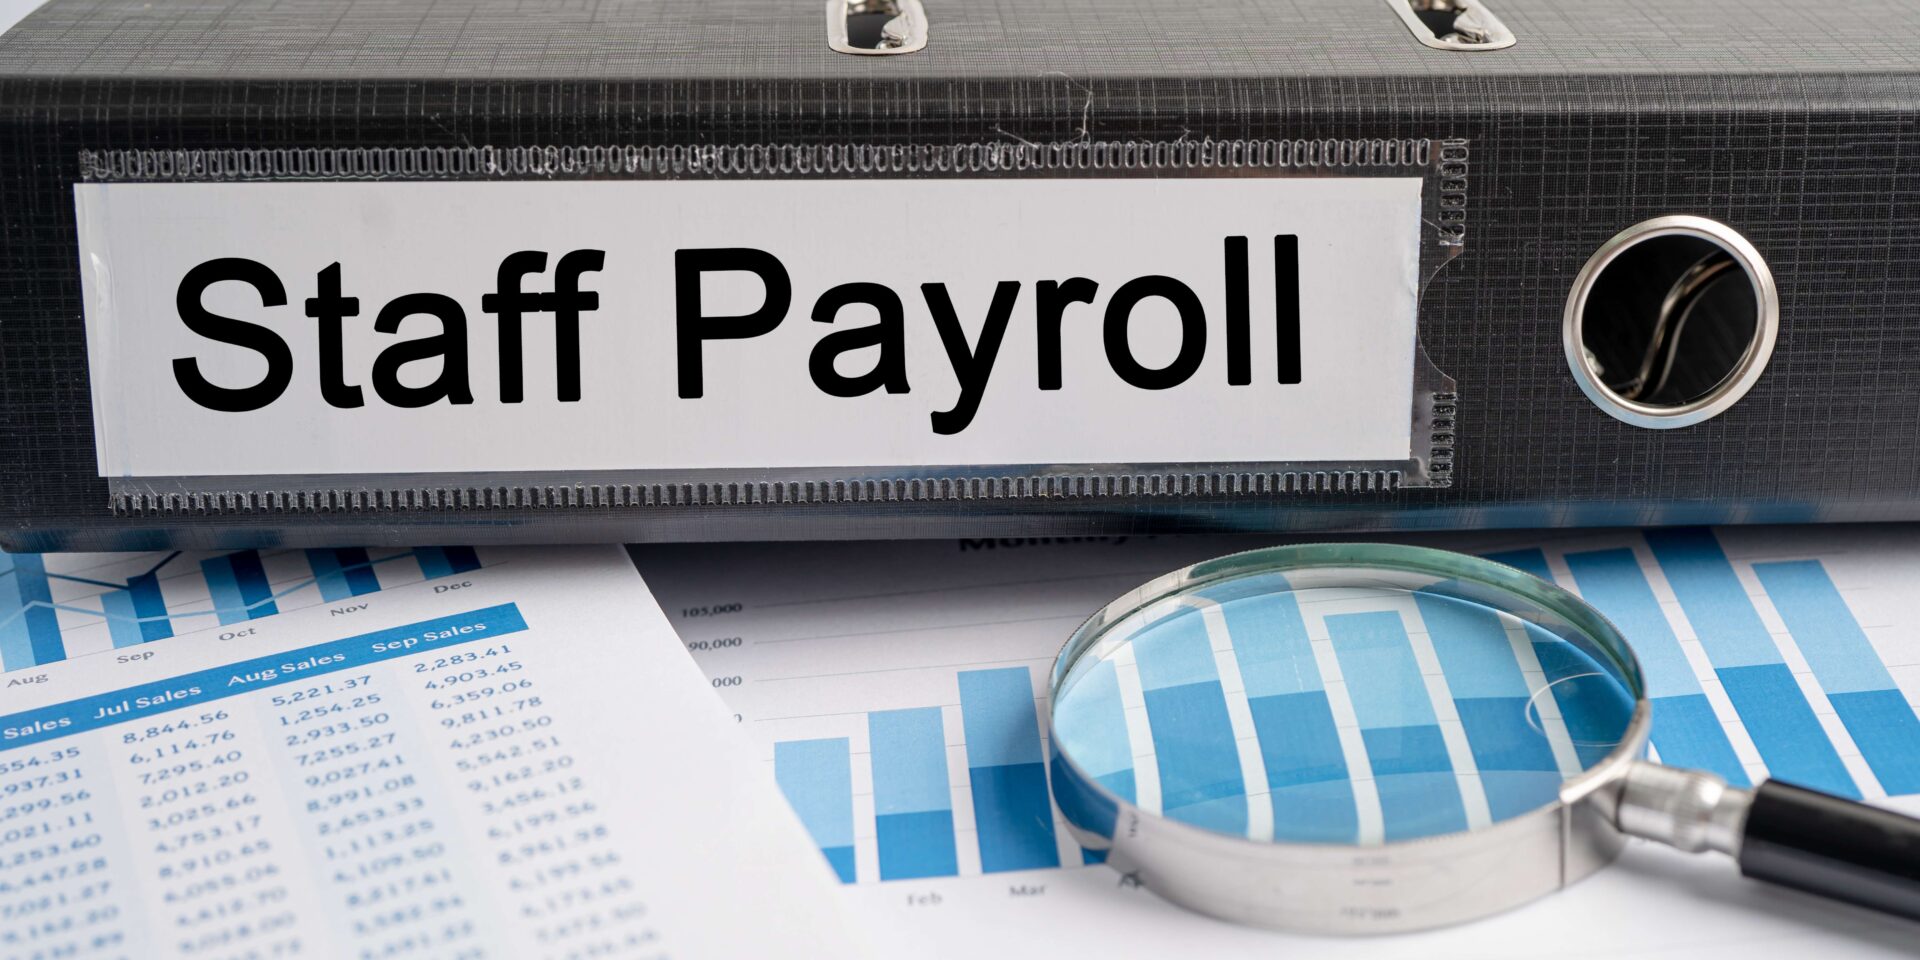 Are Payroll Deductions for Health Insurance Pre-Tax?